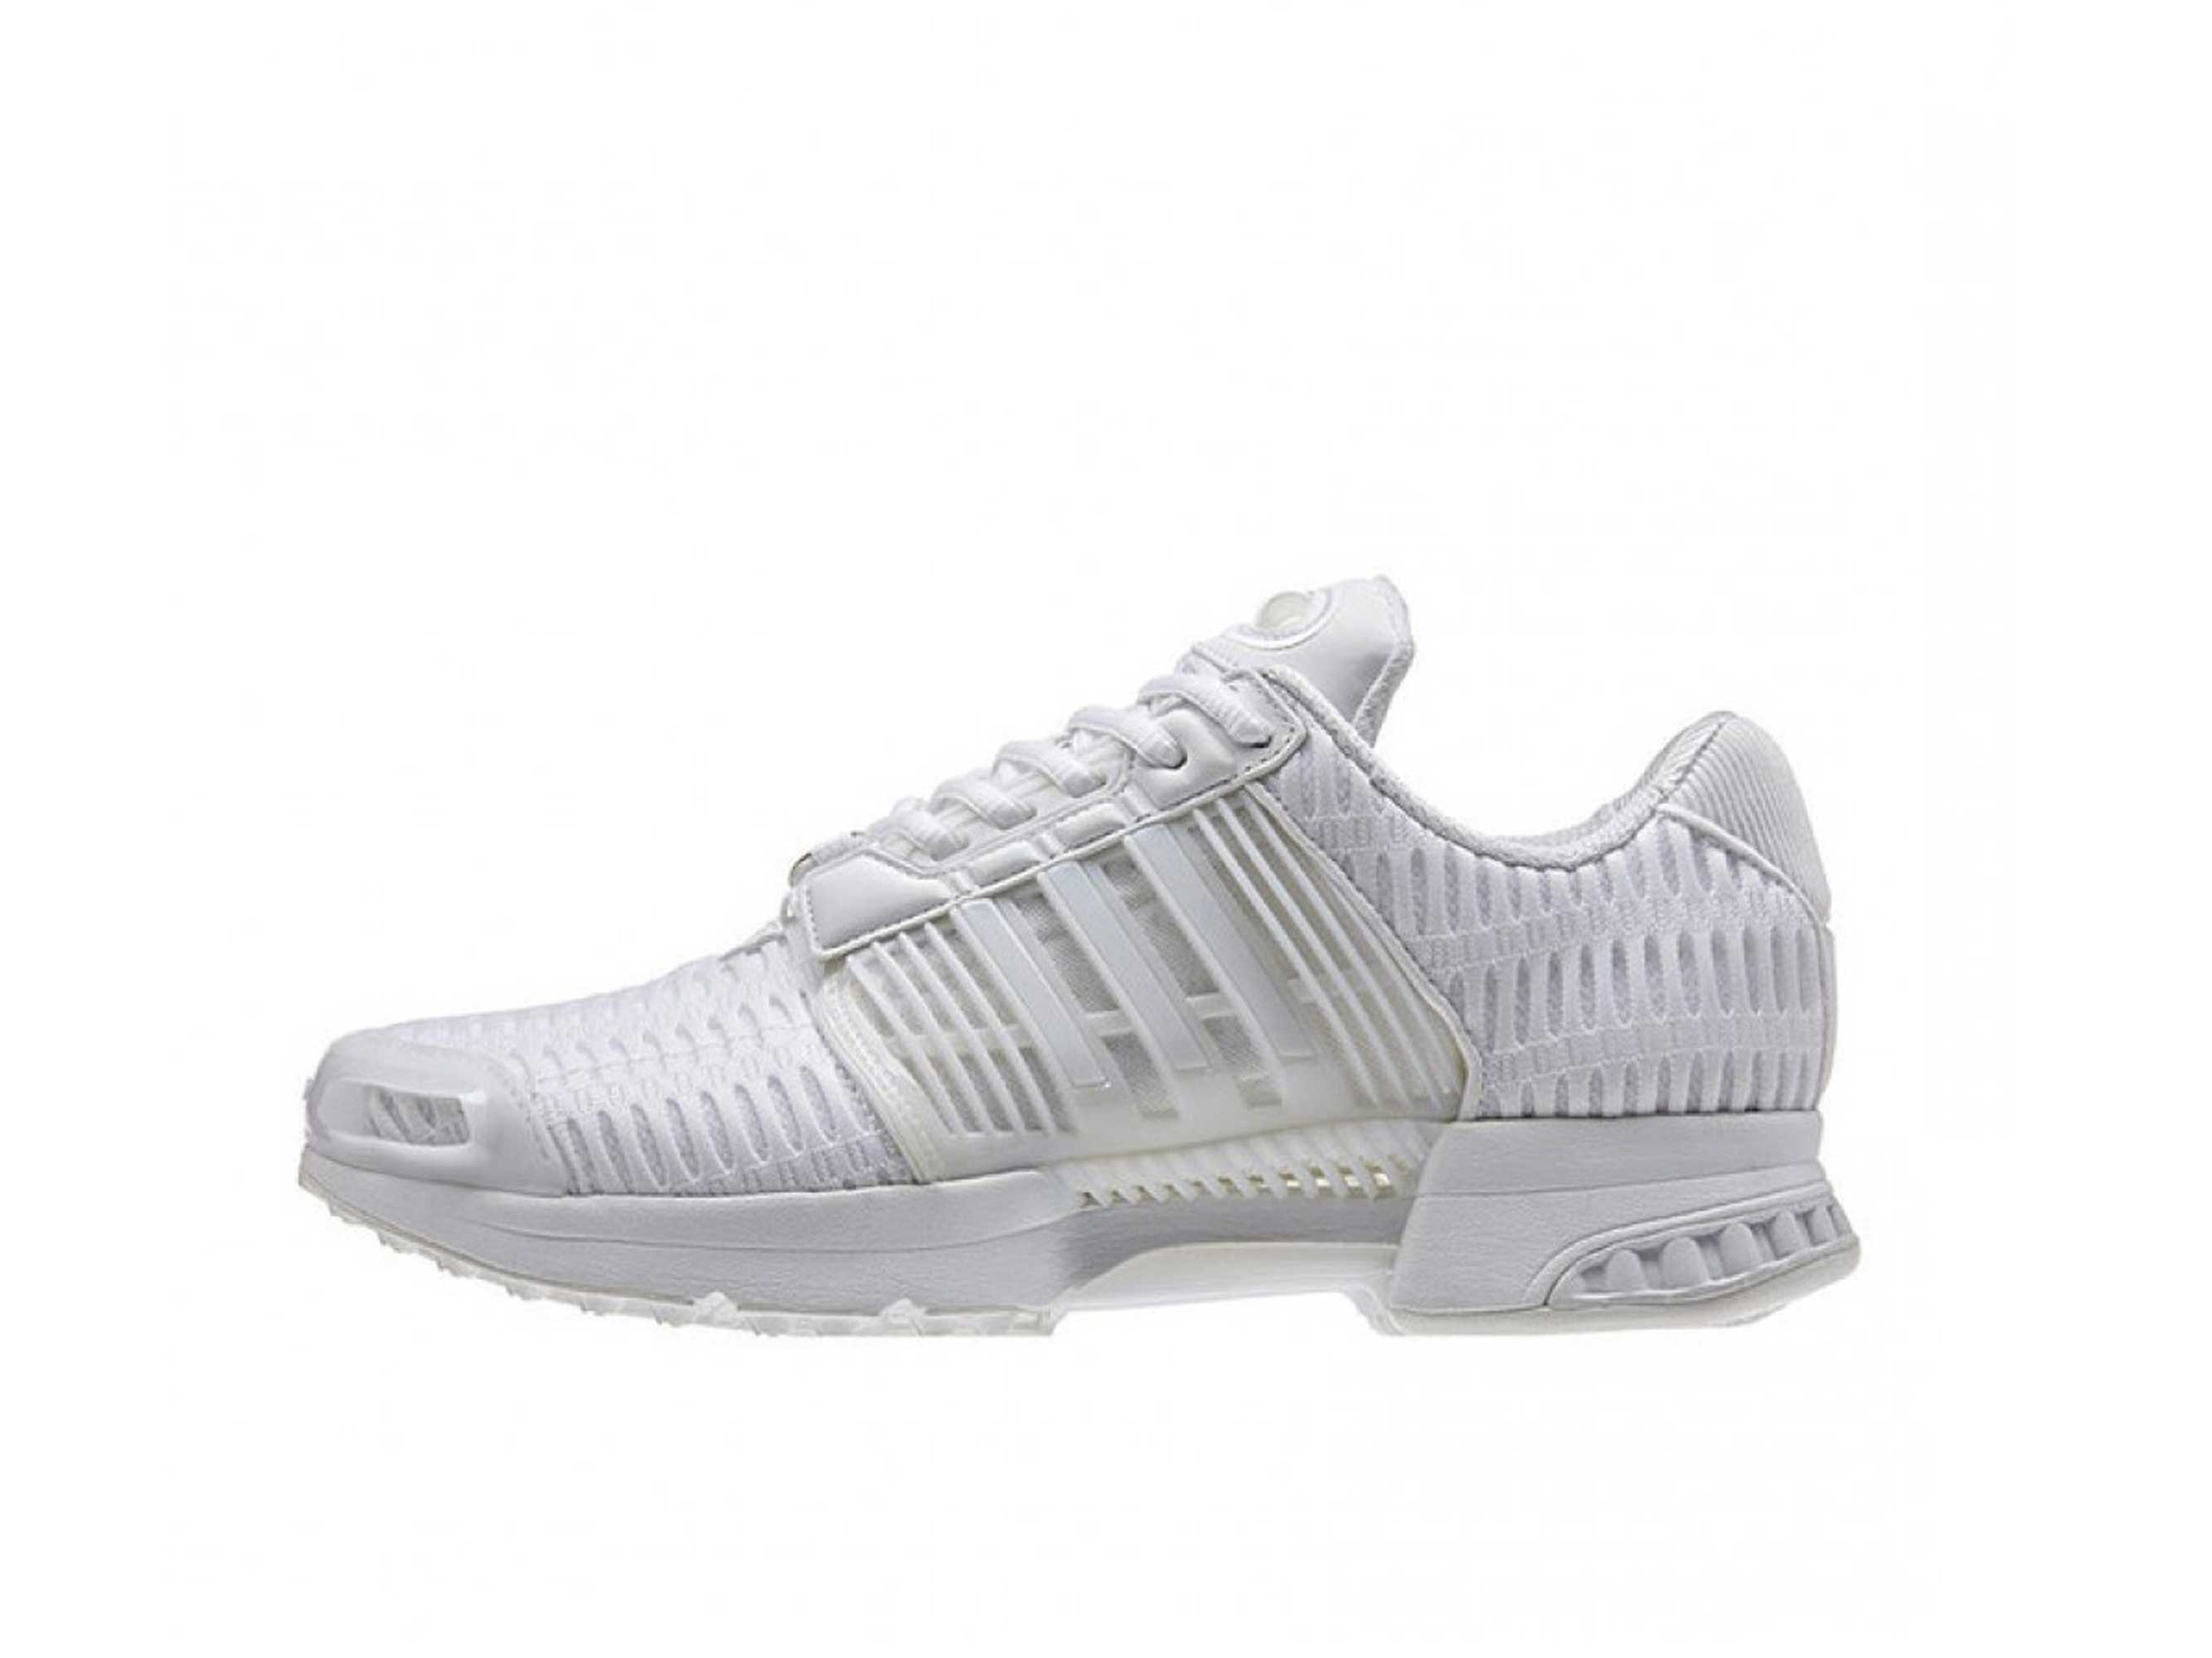 adidas climacool 1 homme